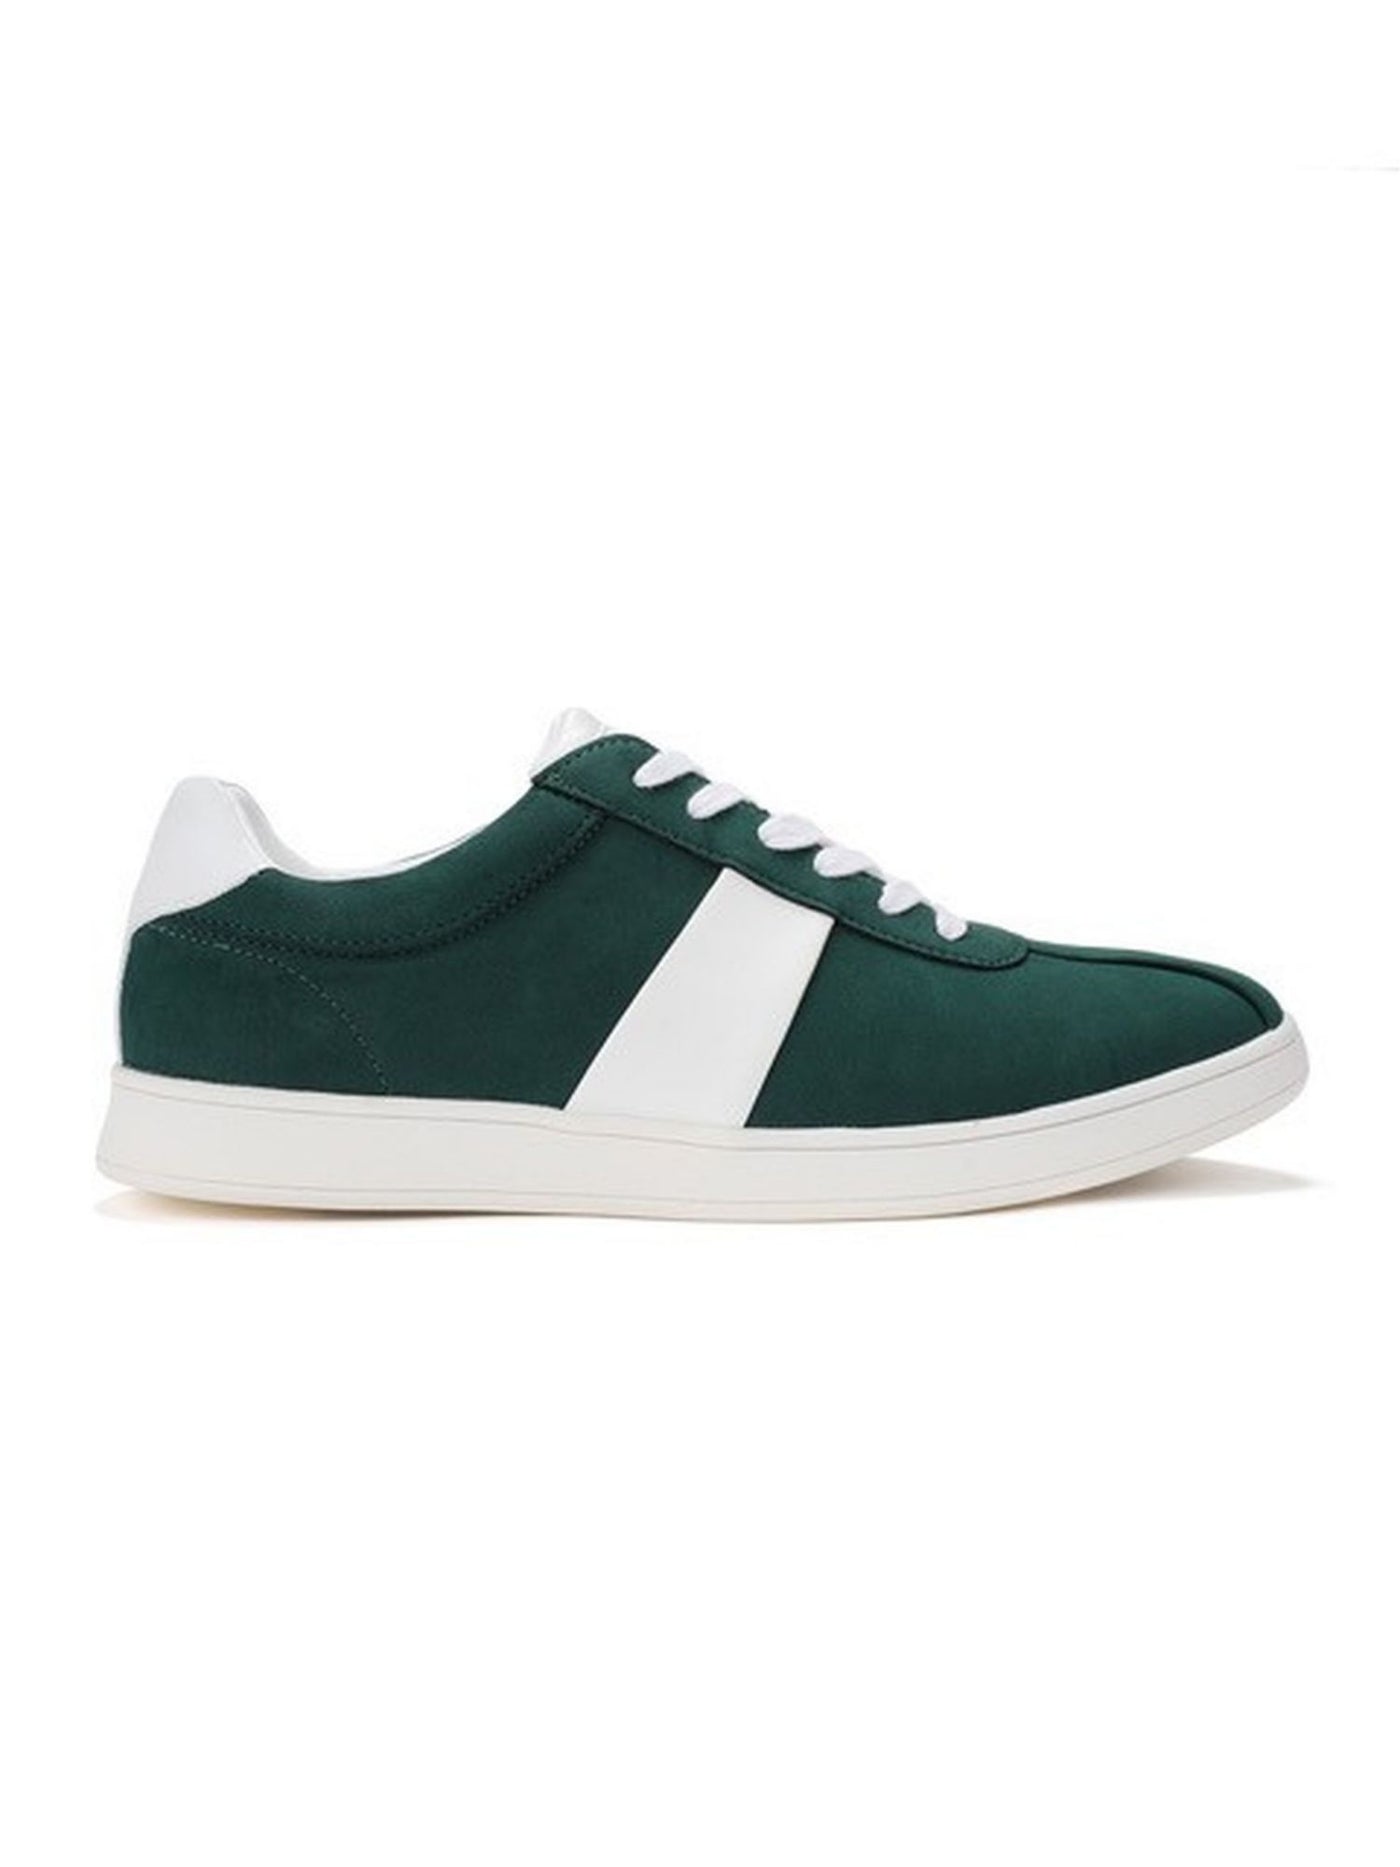 CLUBROOM Mens Green Comfort Edwin Round Toe Platform Lace-Up Athletic Sneakers Shoes 11 M